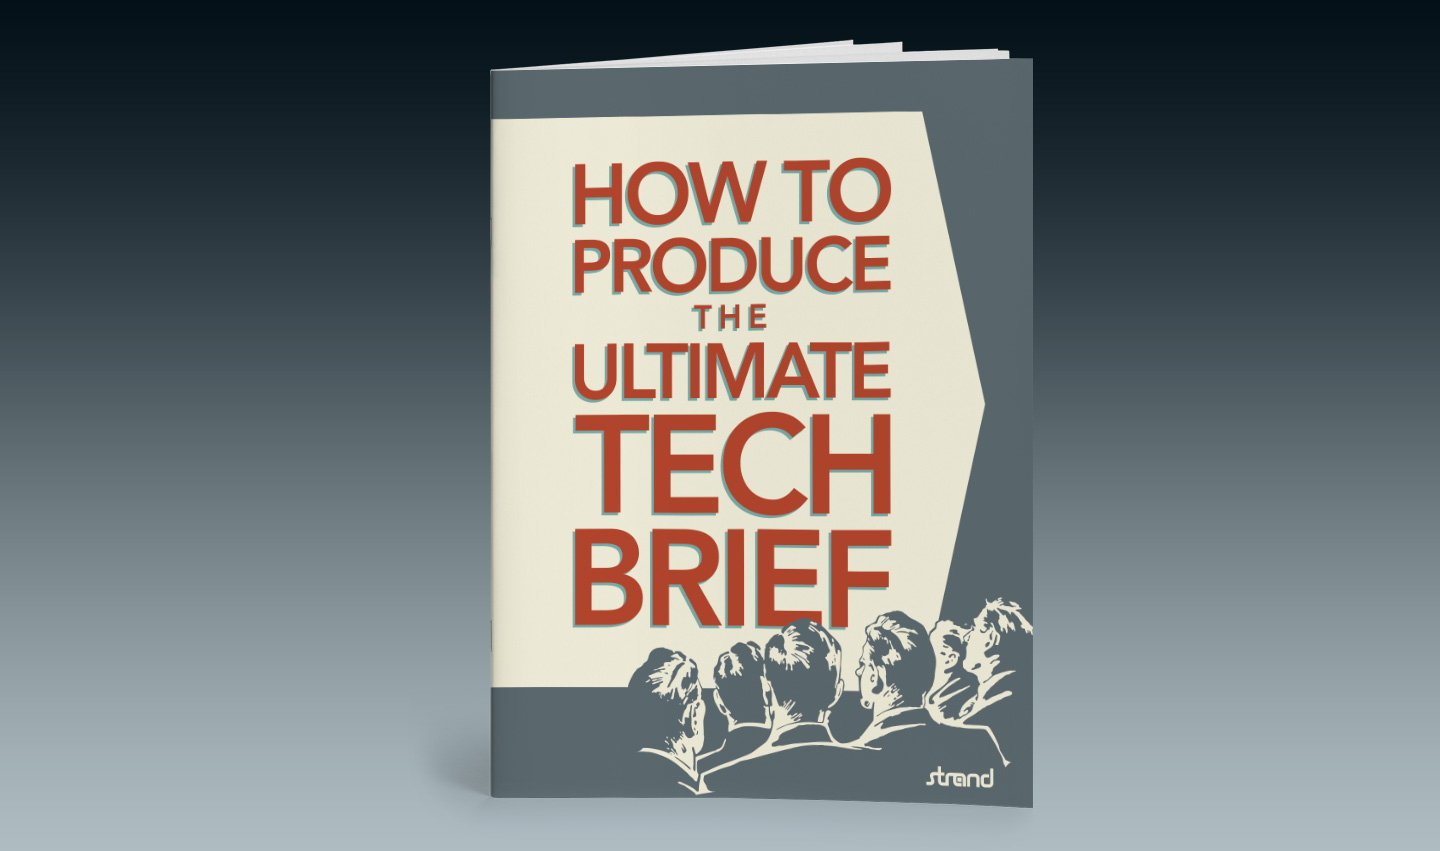 eBook Offers Tips on Producing Effective Tech Briefs as Digital Content